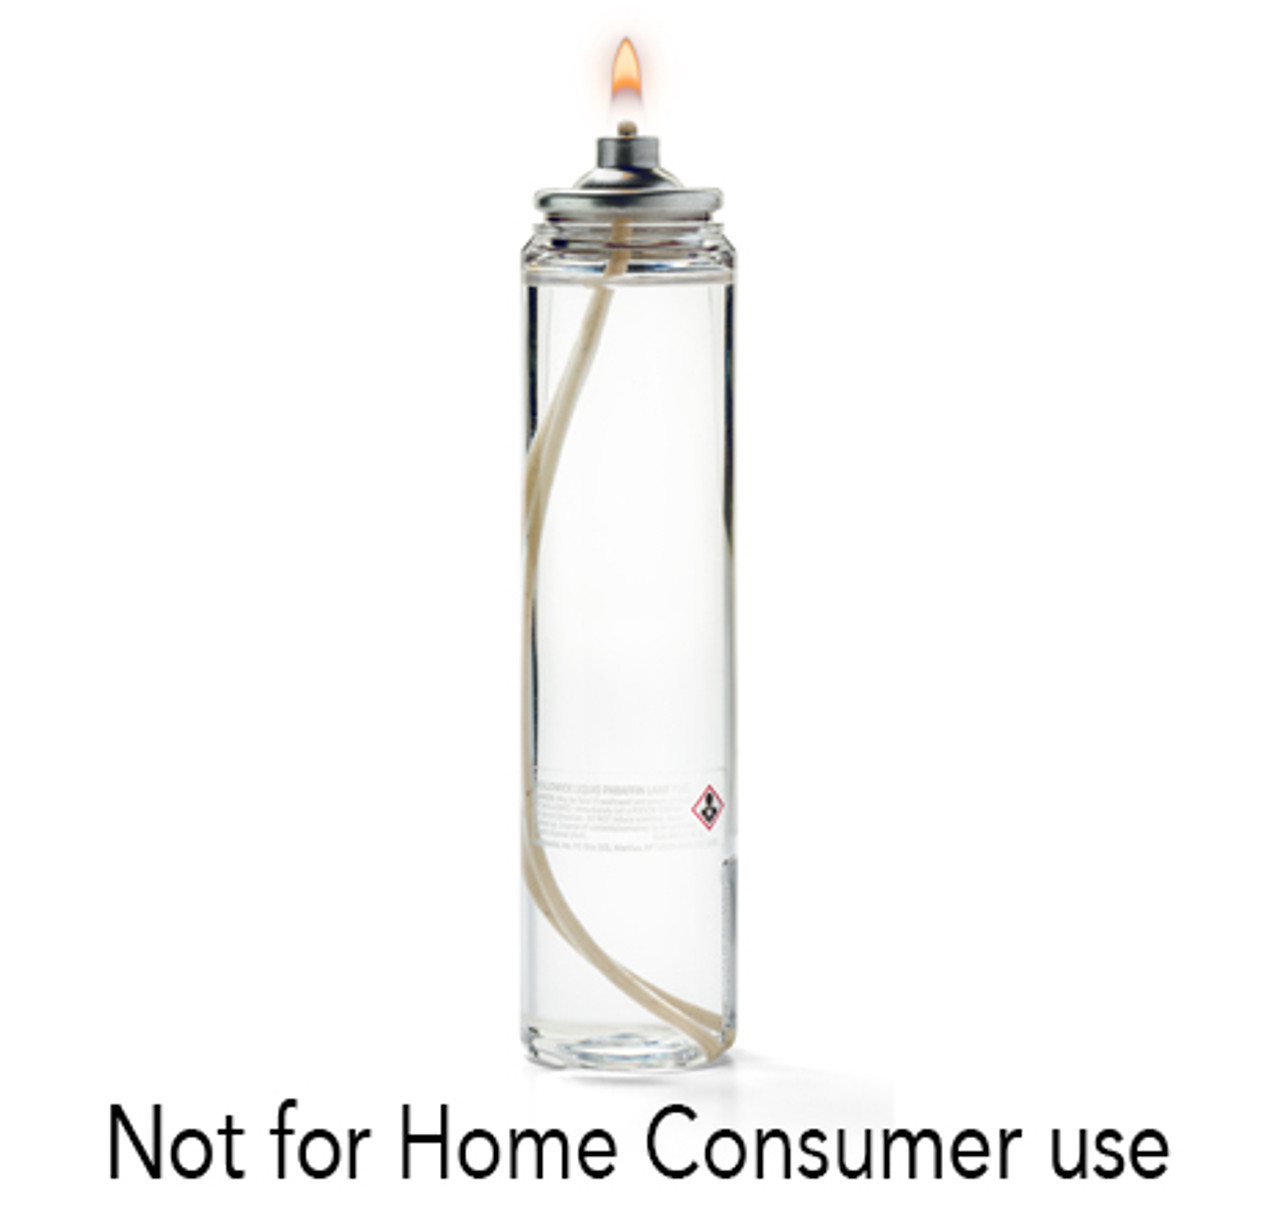 26 Hour Disposable Liquid Candle - HD26 (60/case) - NOT for Home Consumer  USE